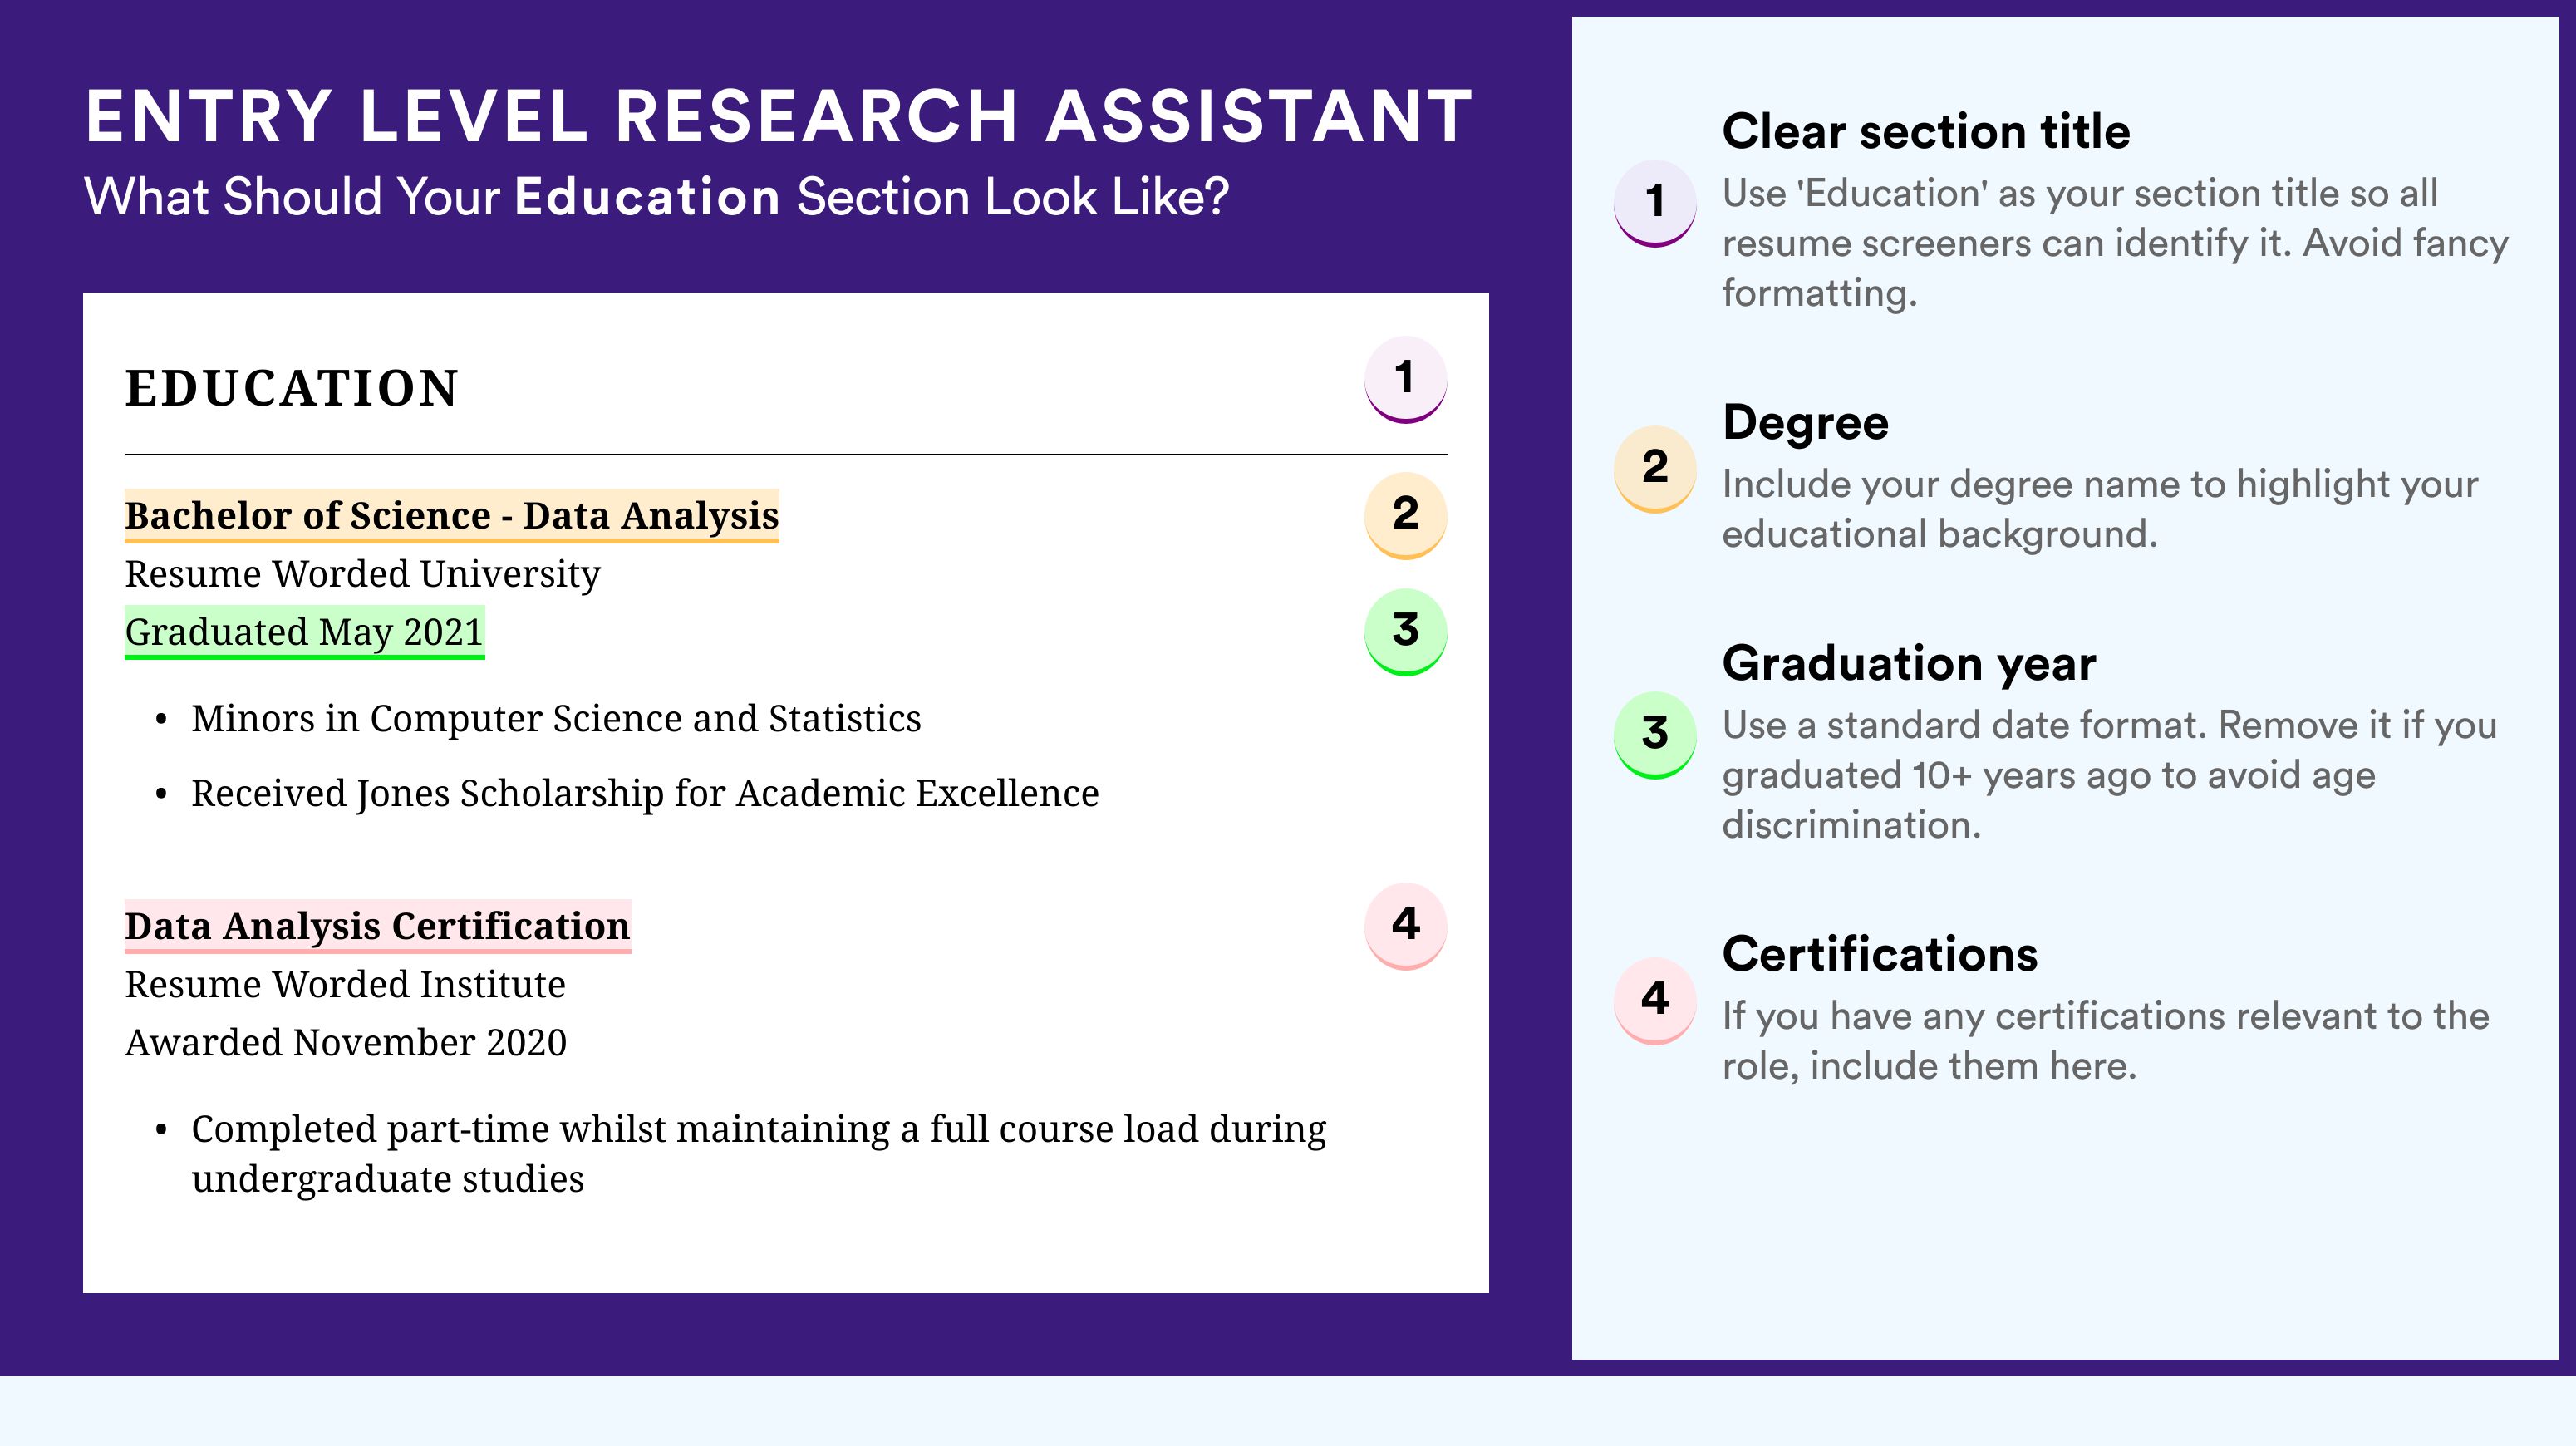 How To Write An Education Section - Entry Level Research Assistant Roles